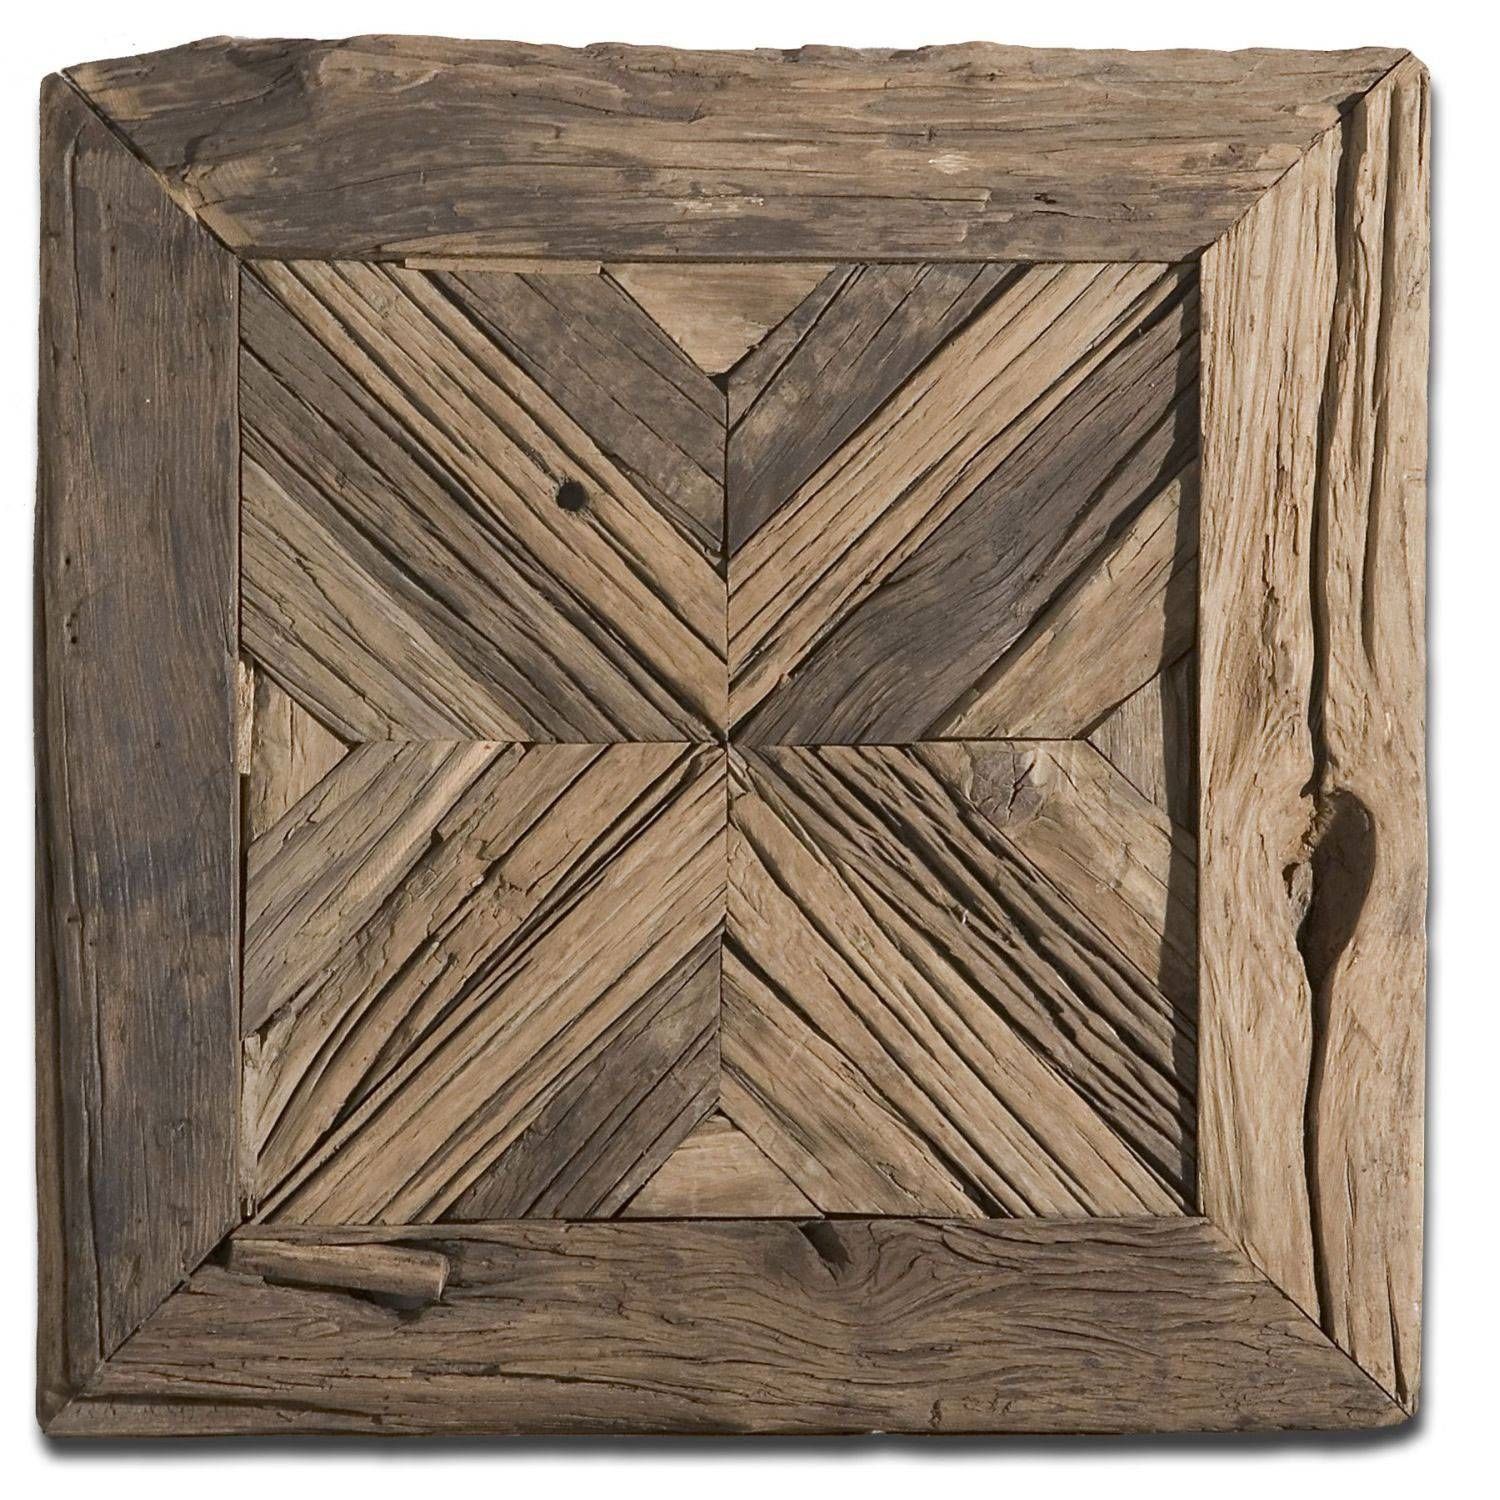 Rennick Rustic Wood Wall Art Uttermost Wall Sculpture Wall Decor With Regard To Most Recently Released Wood Wall Art (View 25 of 25)